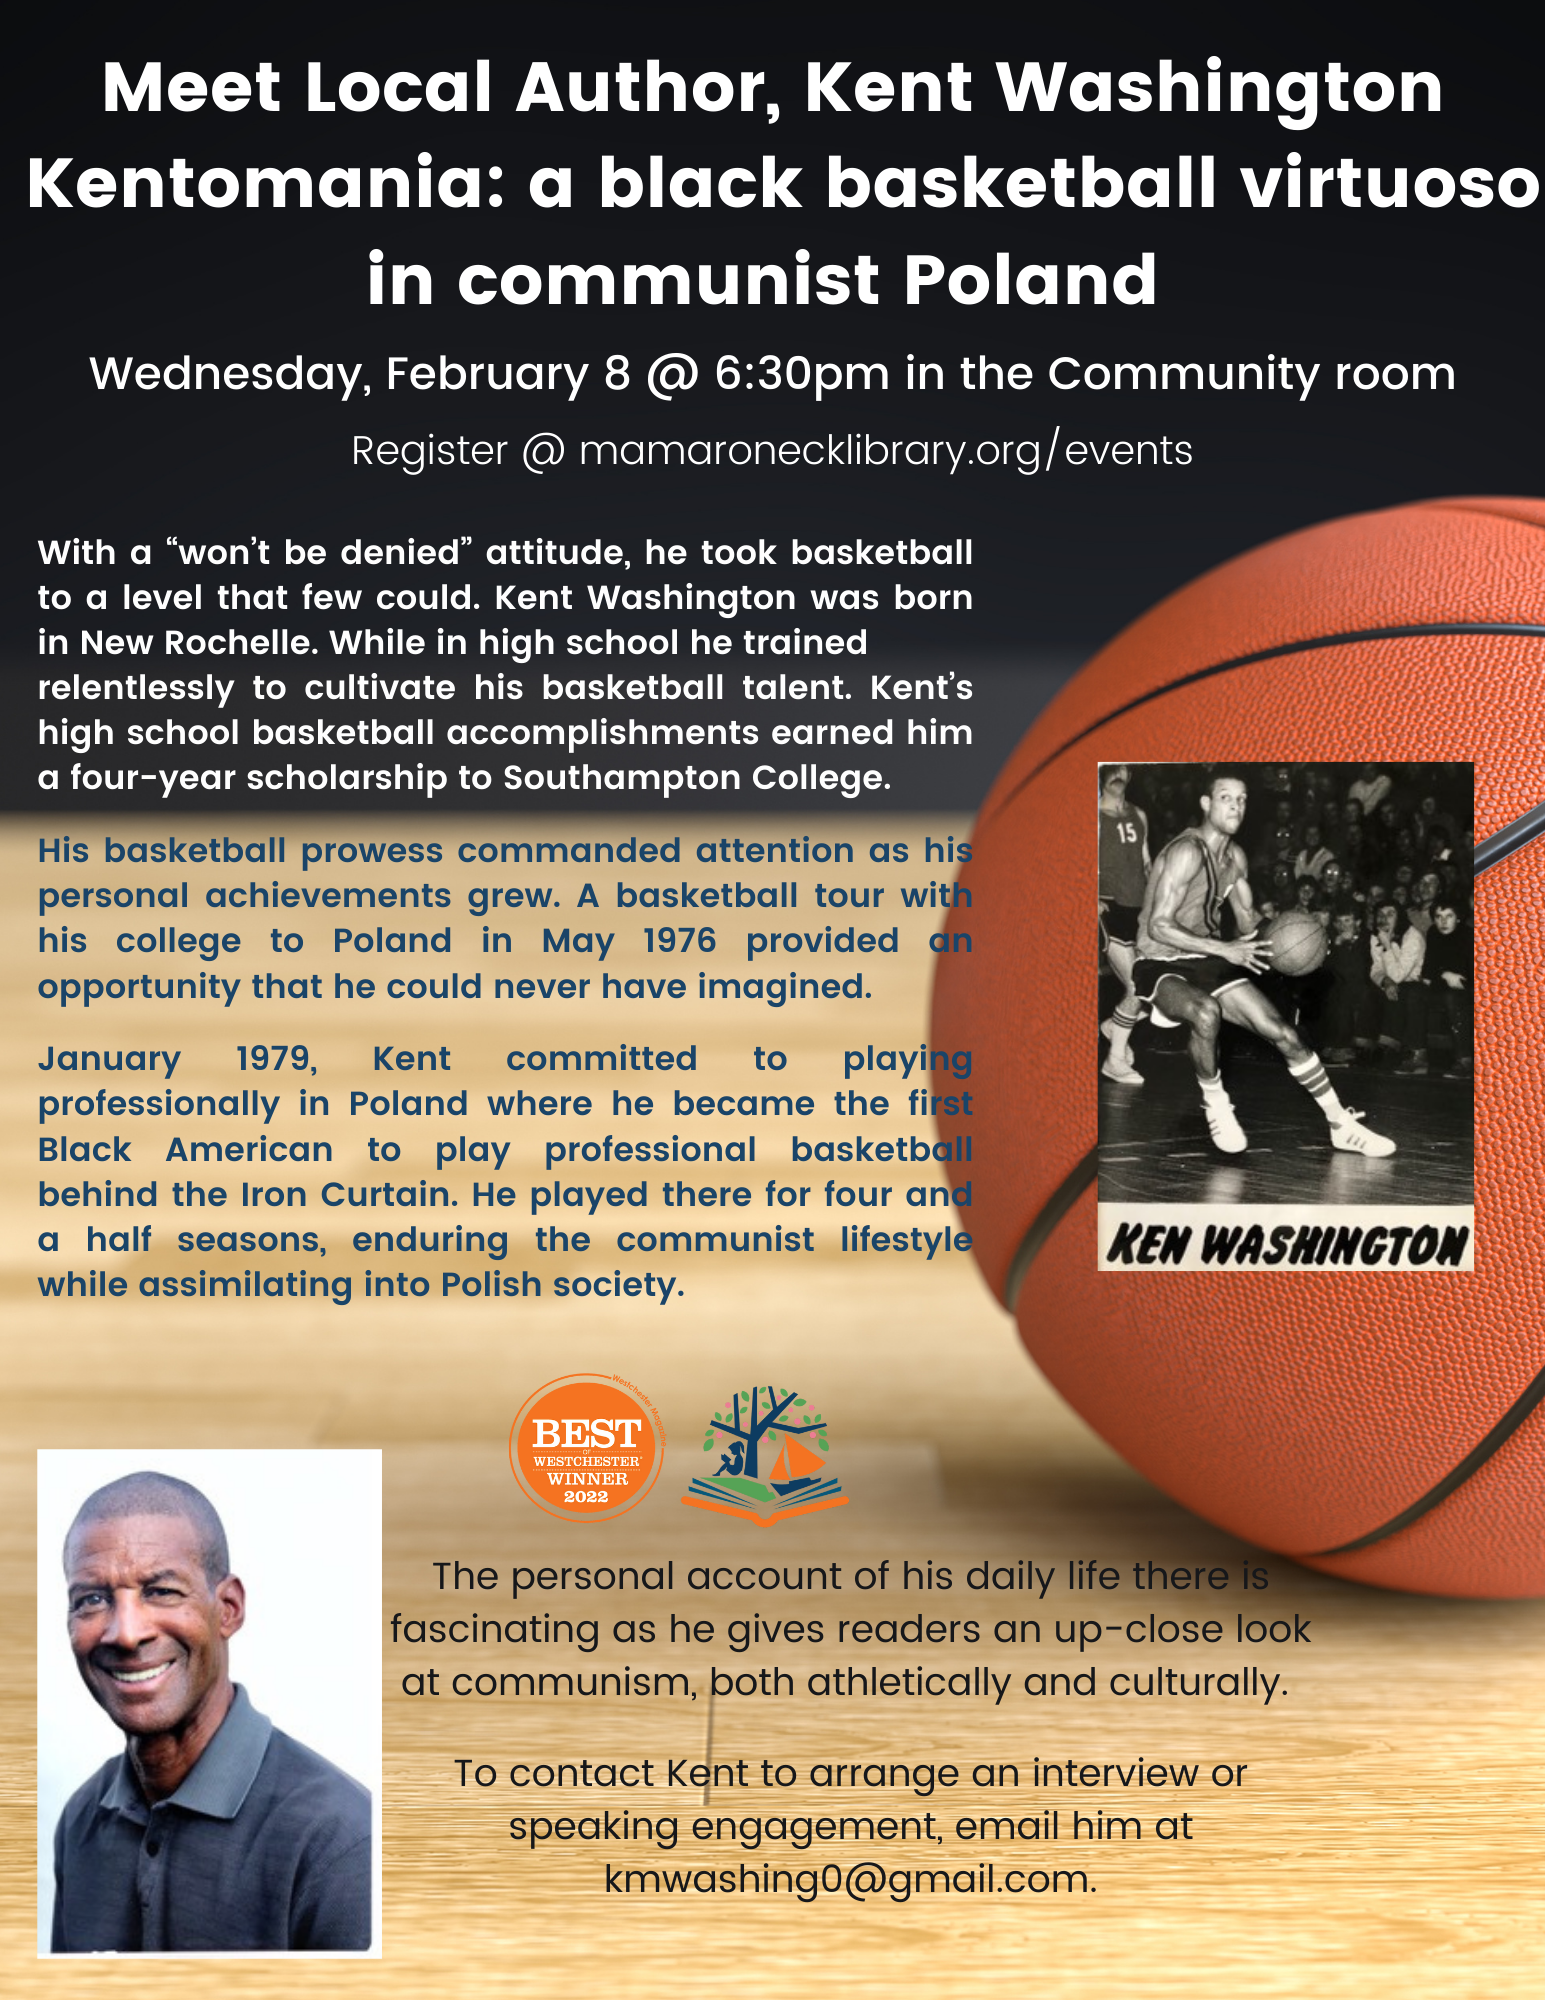 2/8 @ 6:30pm in the Community Room. Kentomania is the story of an american black basketball player who played in communist Poland and became a star